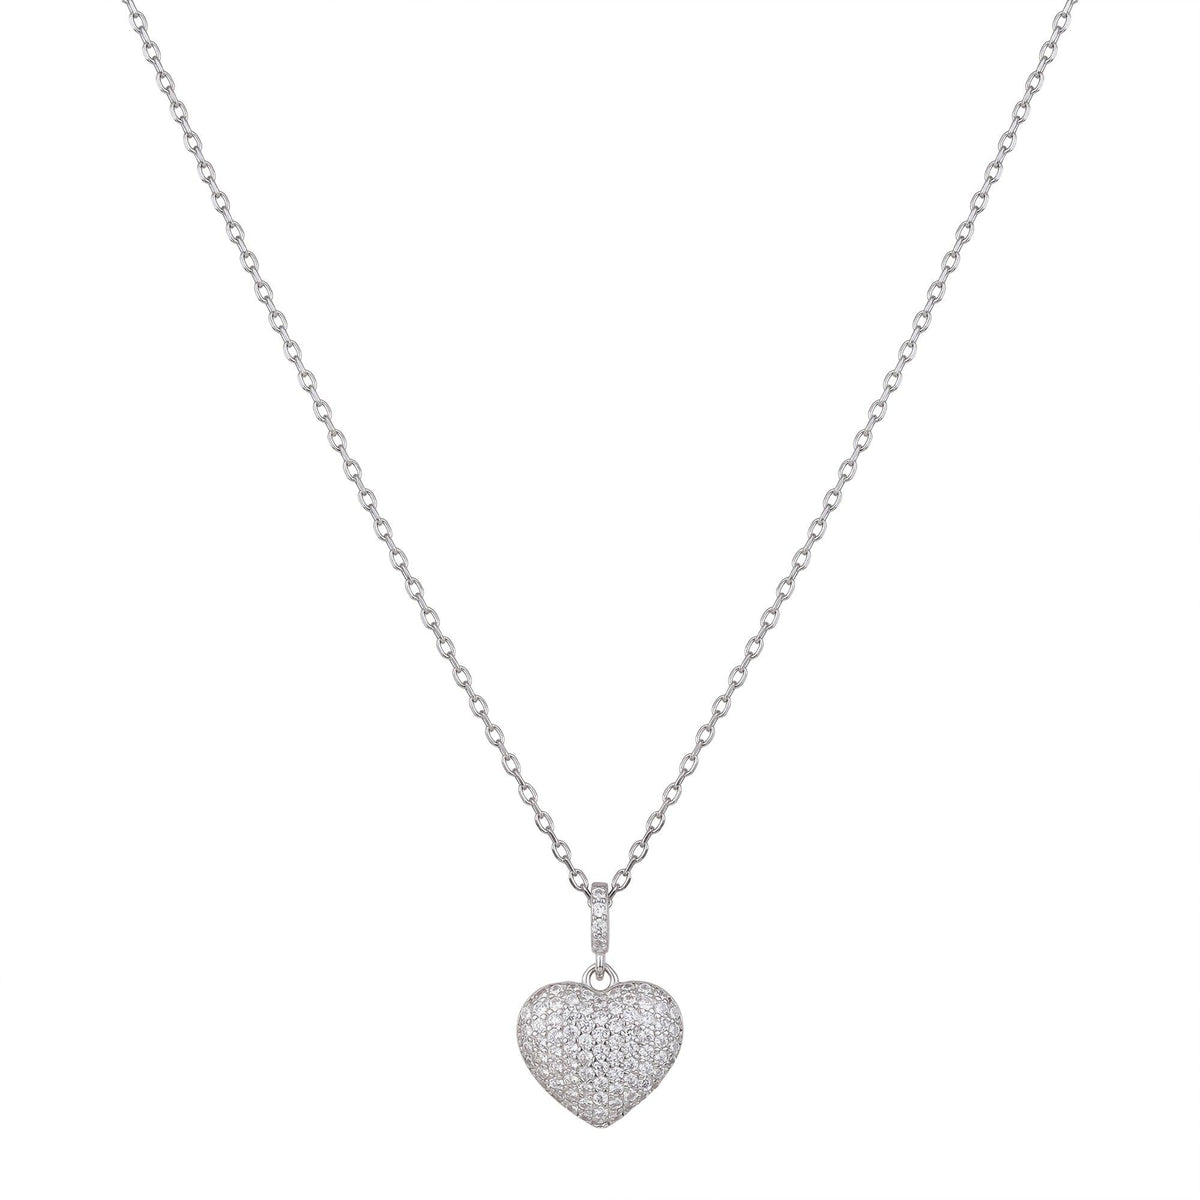 Heart Iced Out Necklace - silvermark